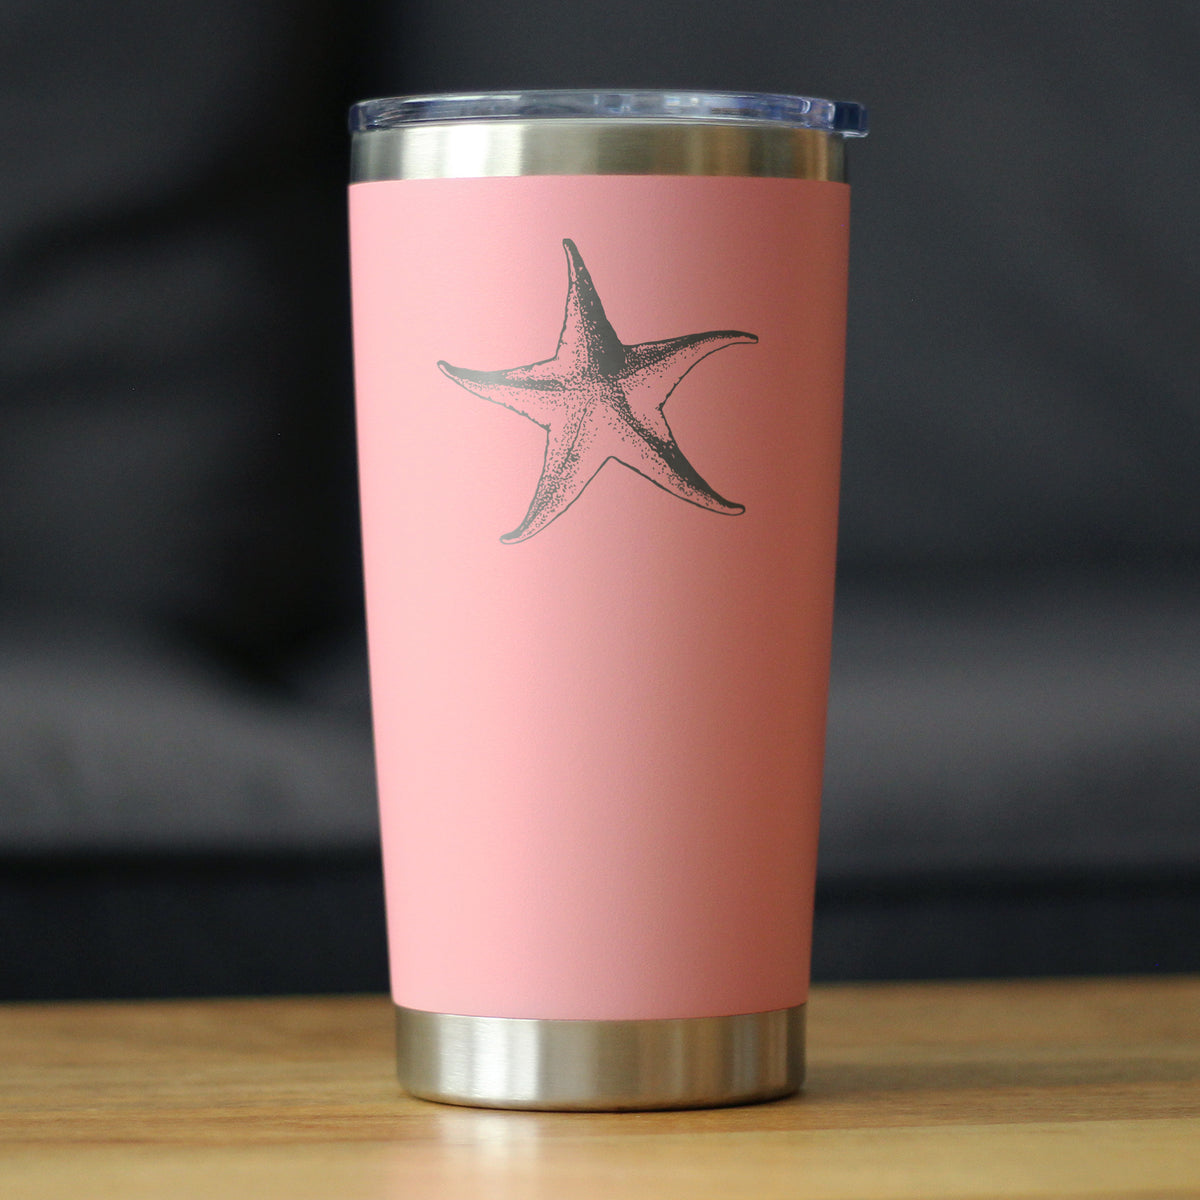 Starfish - Insulated Coffee Tumbler Cup with Sliding Lid - Stainless Steel Travel Mug - Unique Ocean Gifts for Women and Men